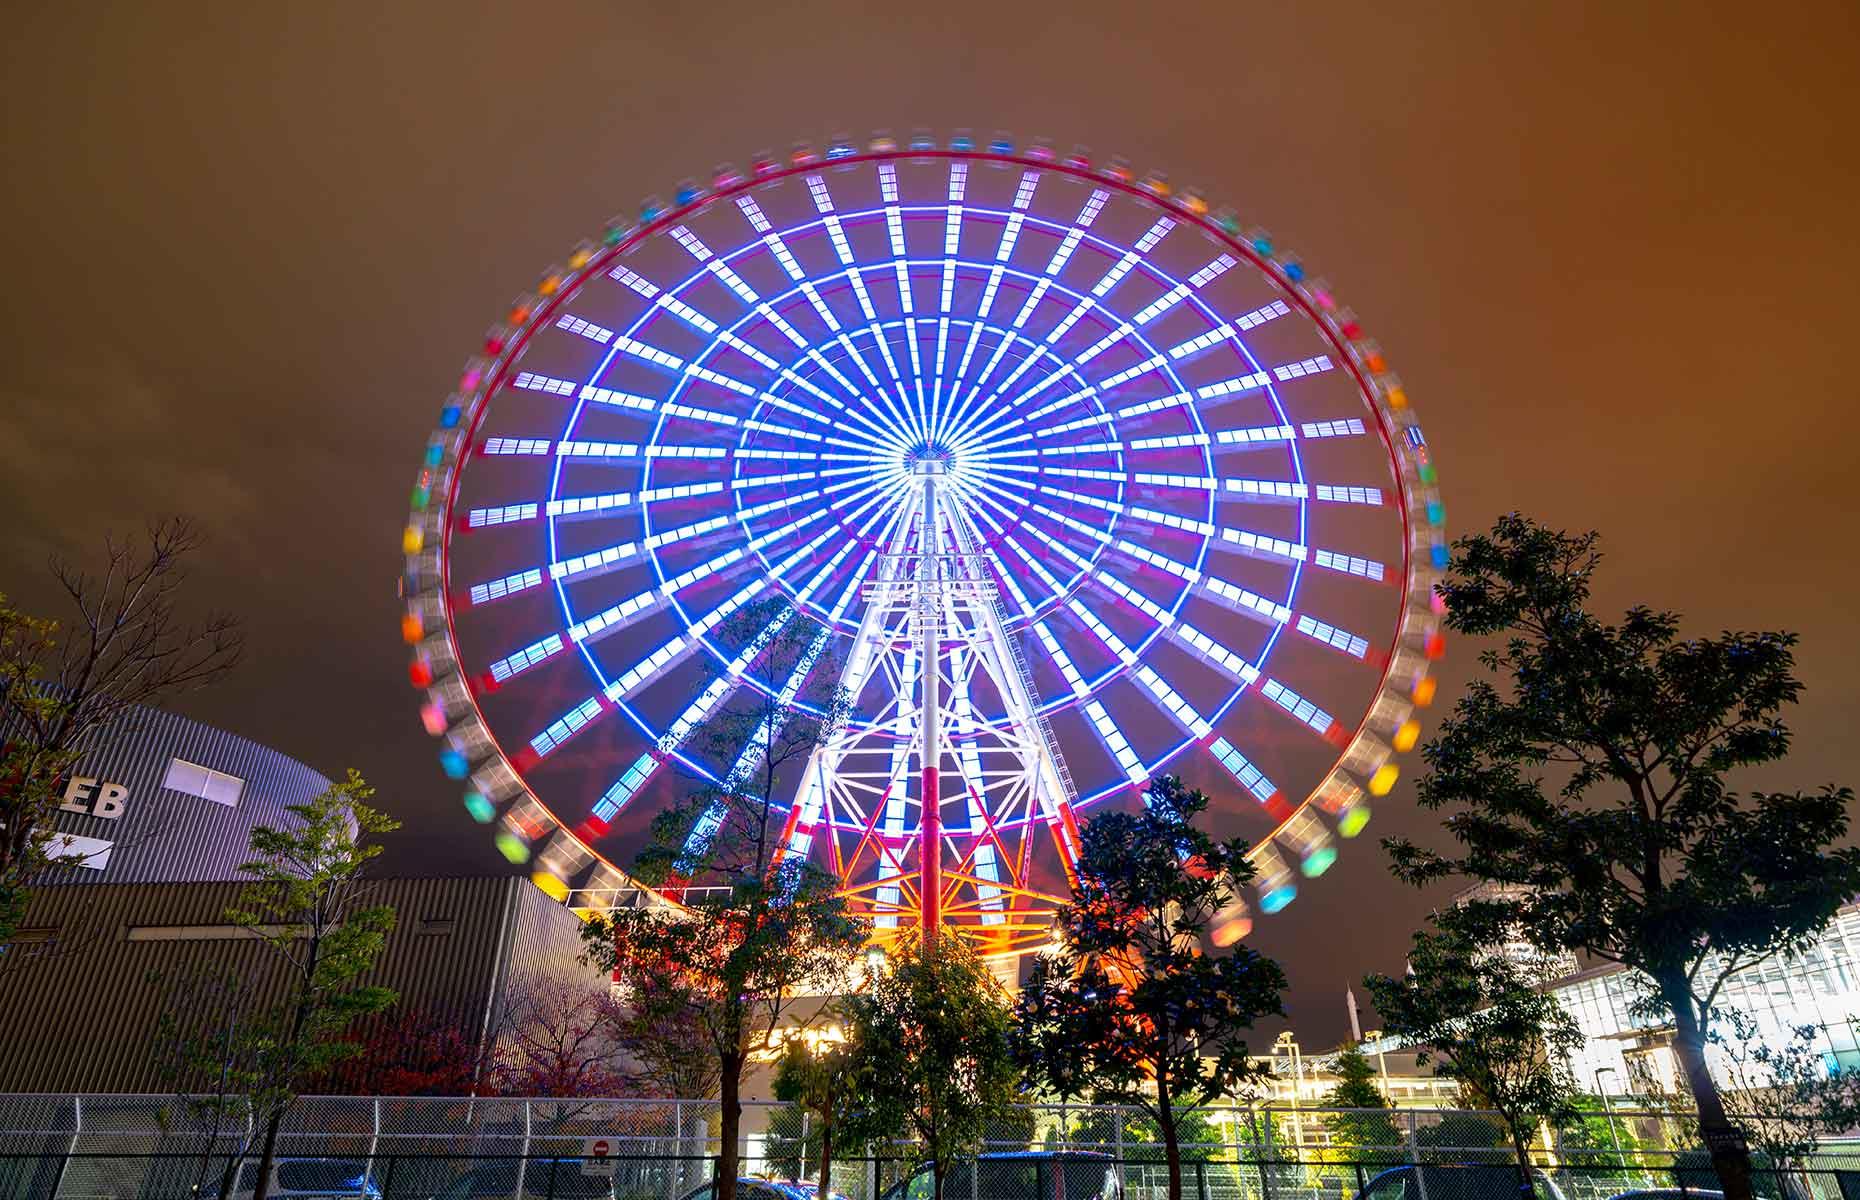 Daikanransha (or the Giant Sky Wheel) formed part of Palette Town, a huge shopping, dining and entertainment complex on the man-made island of Odaiba. The 115-foot (35m) Ferris wheel once reigned supreme as the largest of its kind in the world, with a 15-minute ride taking in the views of surrounding Palette Town and sky-high buildings.